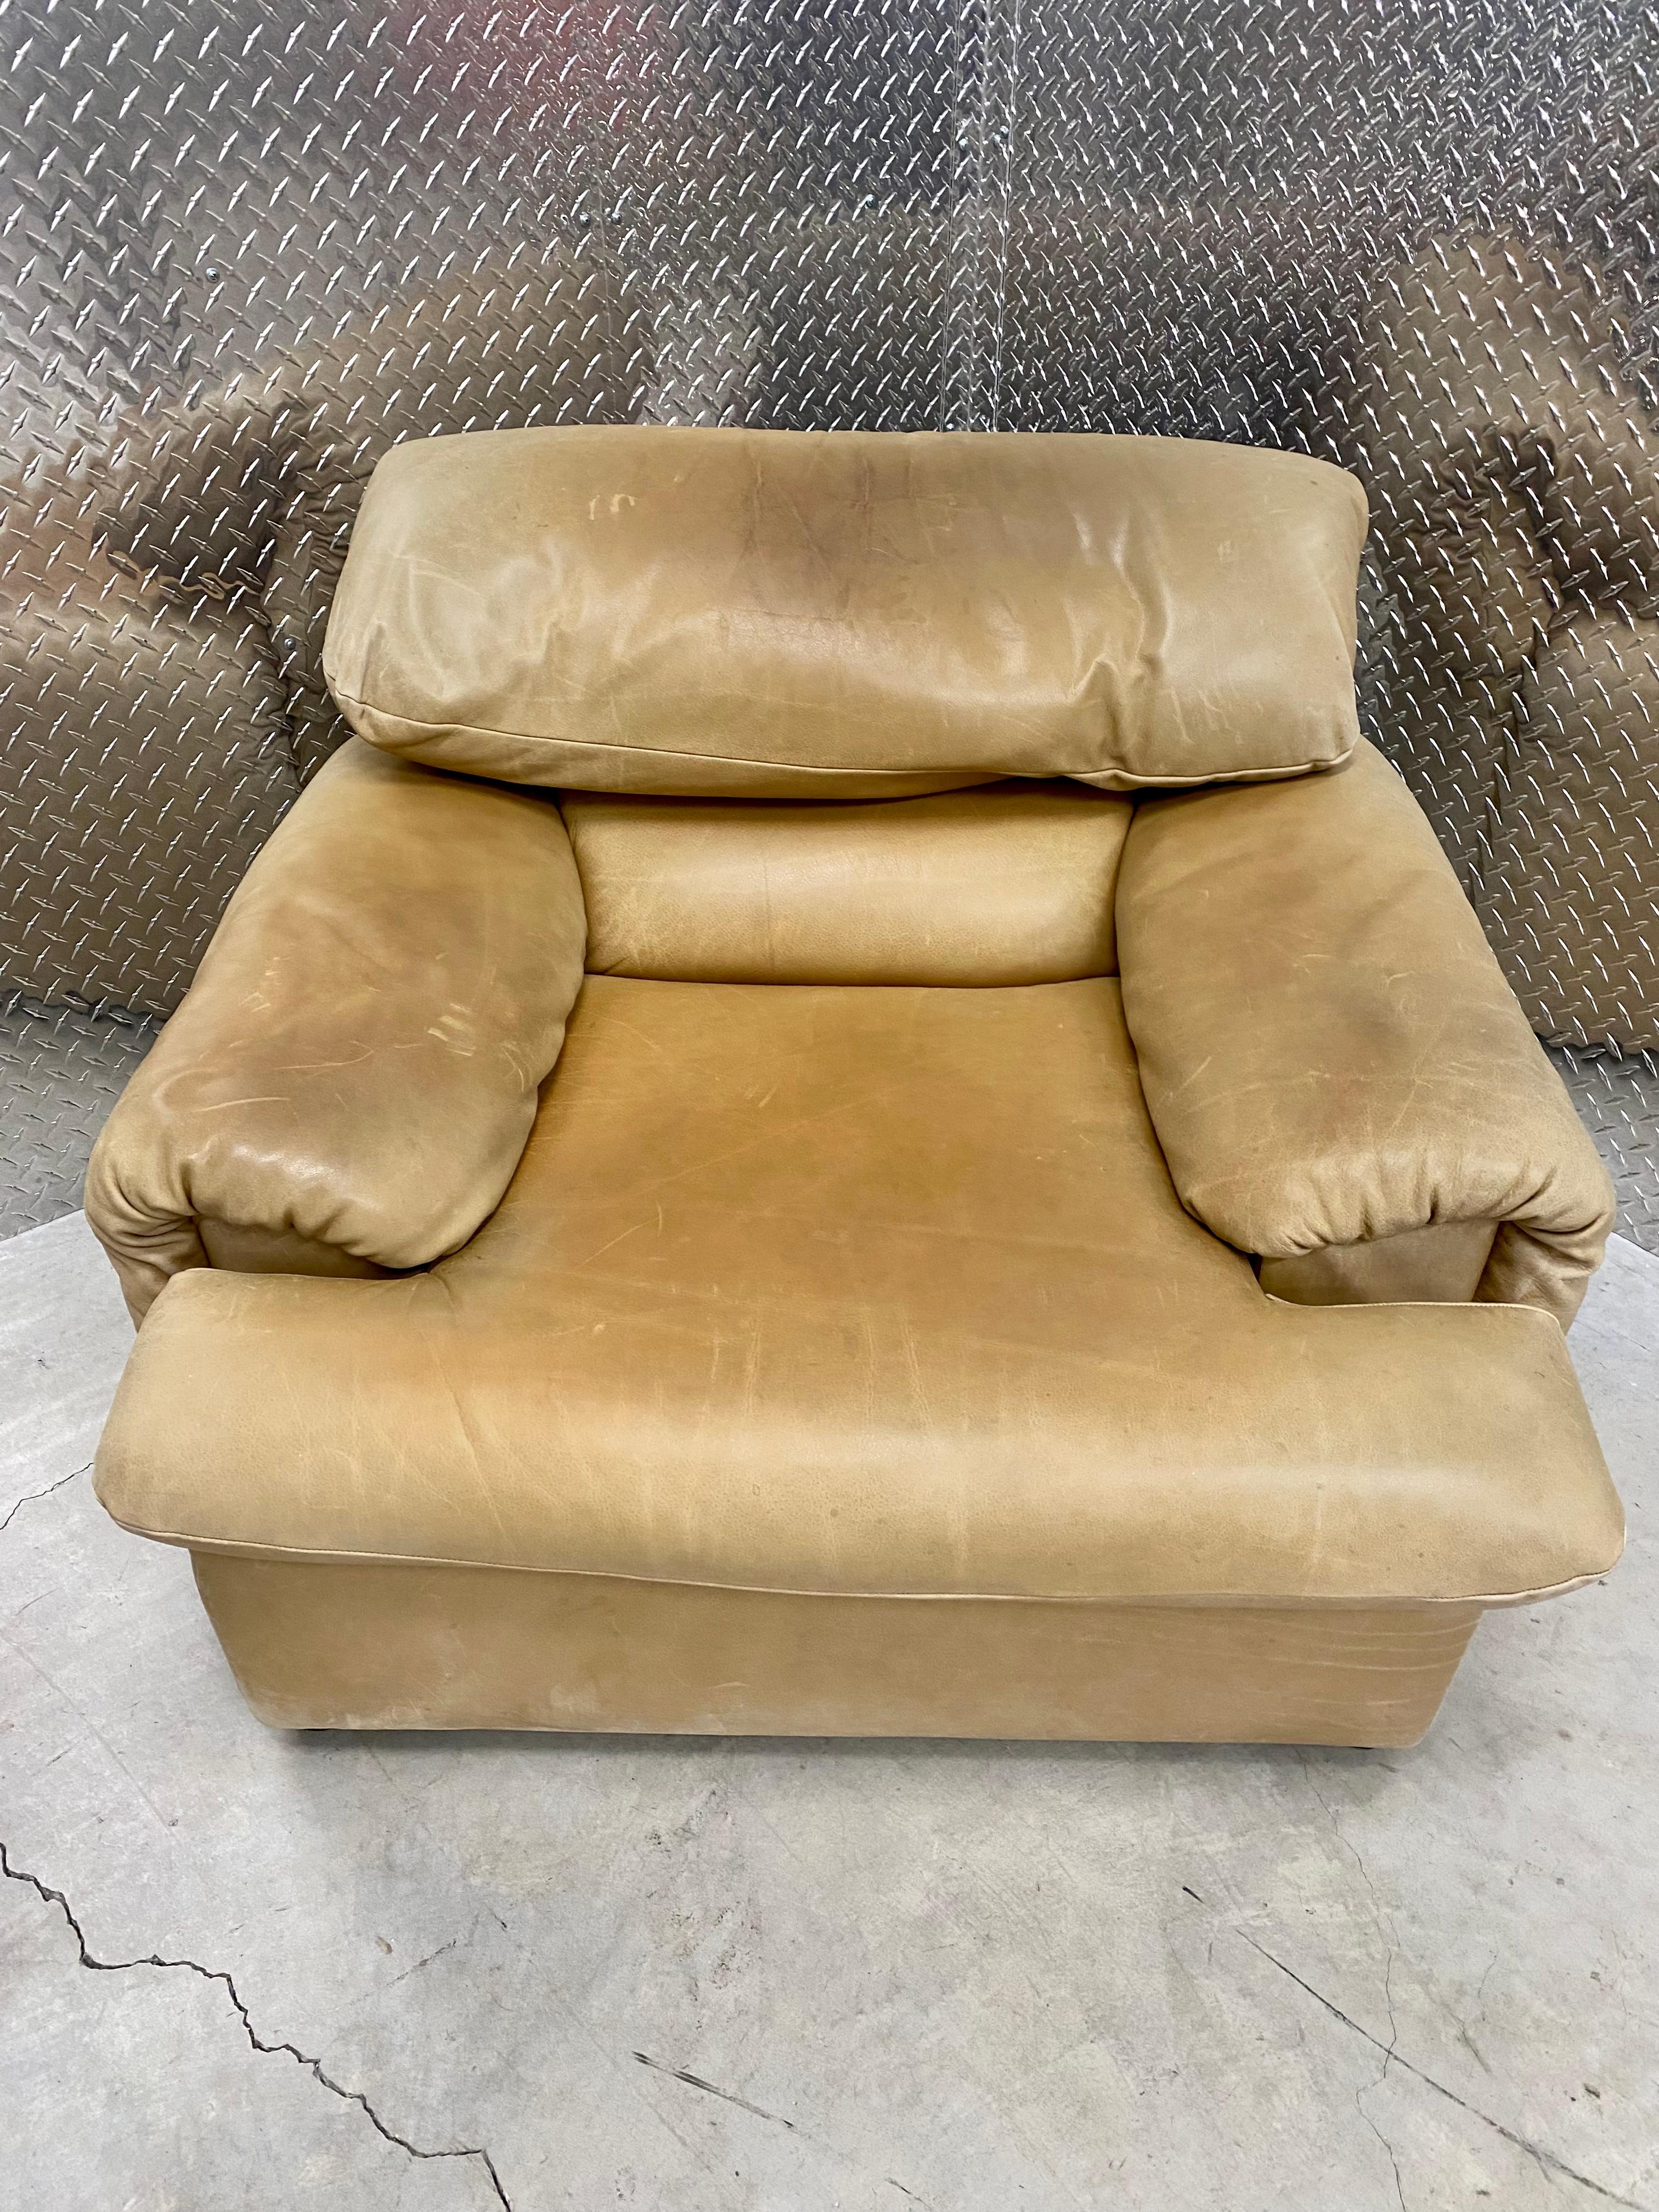 Attributed to Cassina Rare Cube Maralunga Leather Chairs and Ottoman, Set of 3 For Sale 3